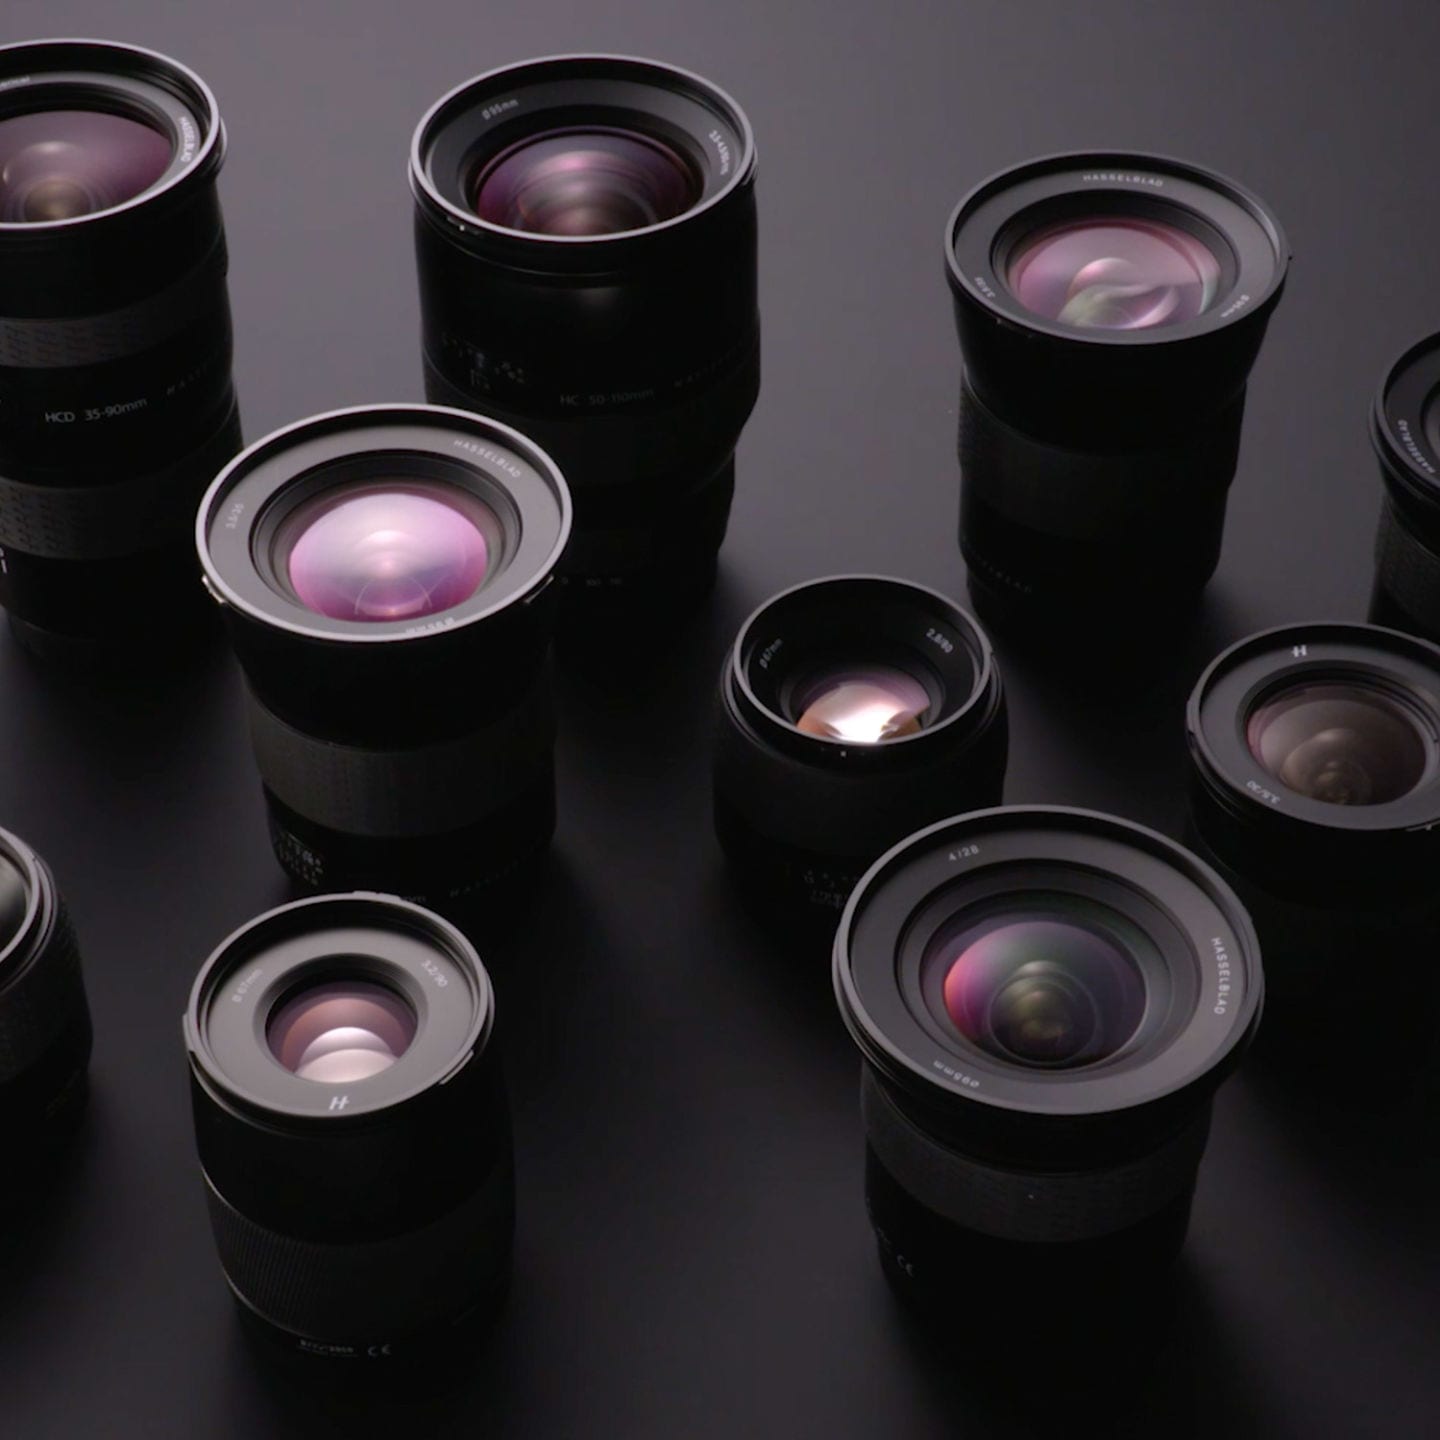 07. Camera Lenses and Focal Length